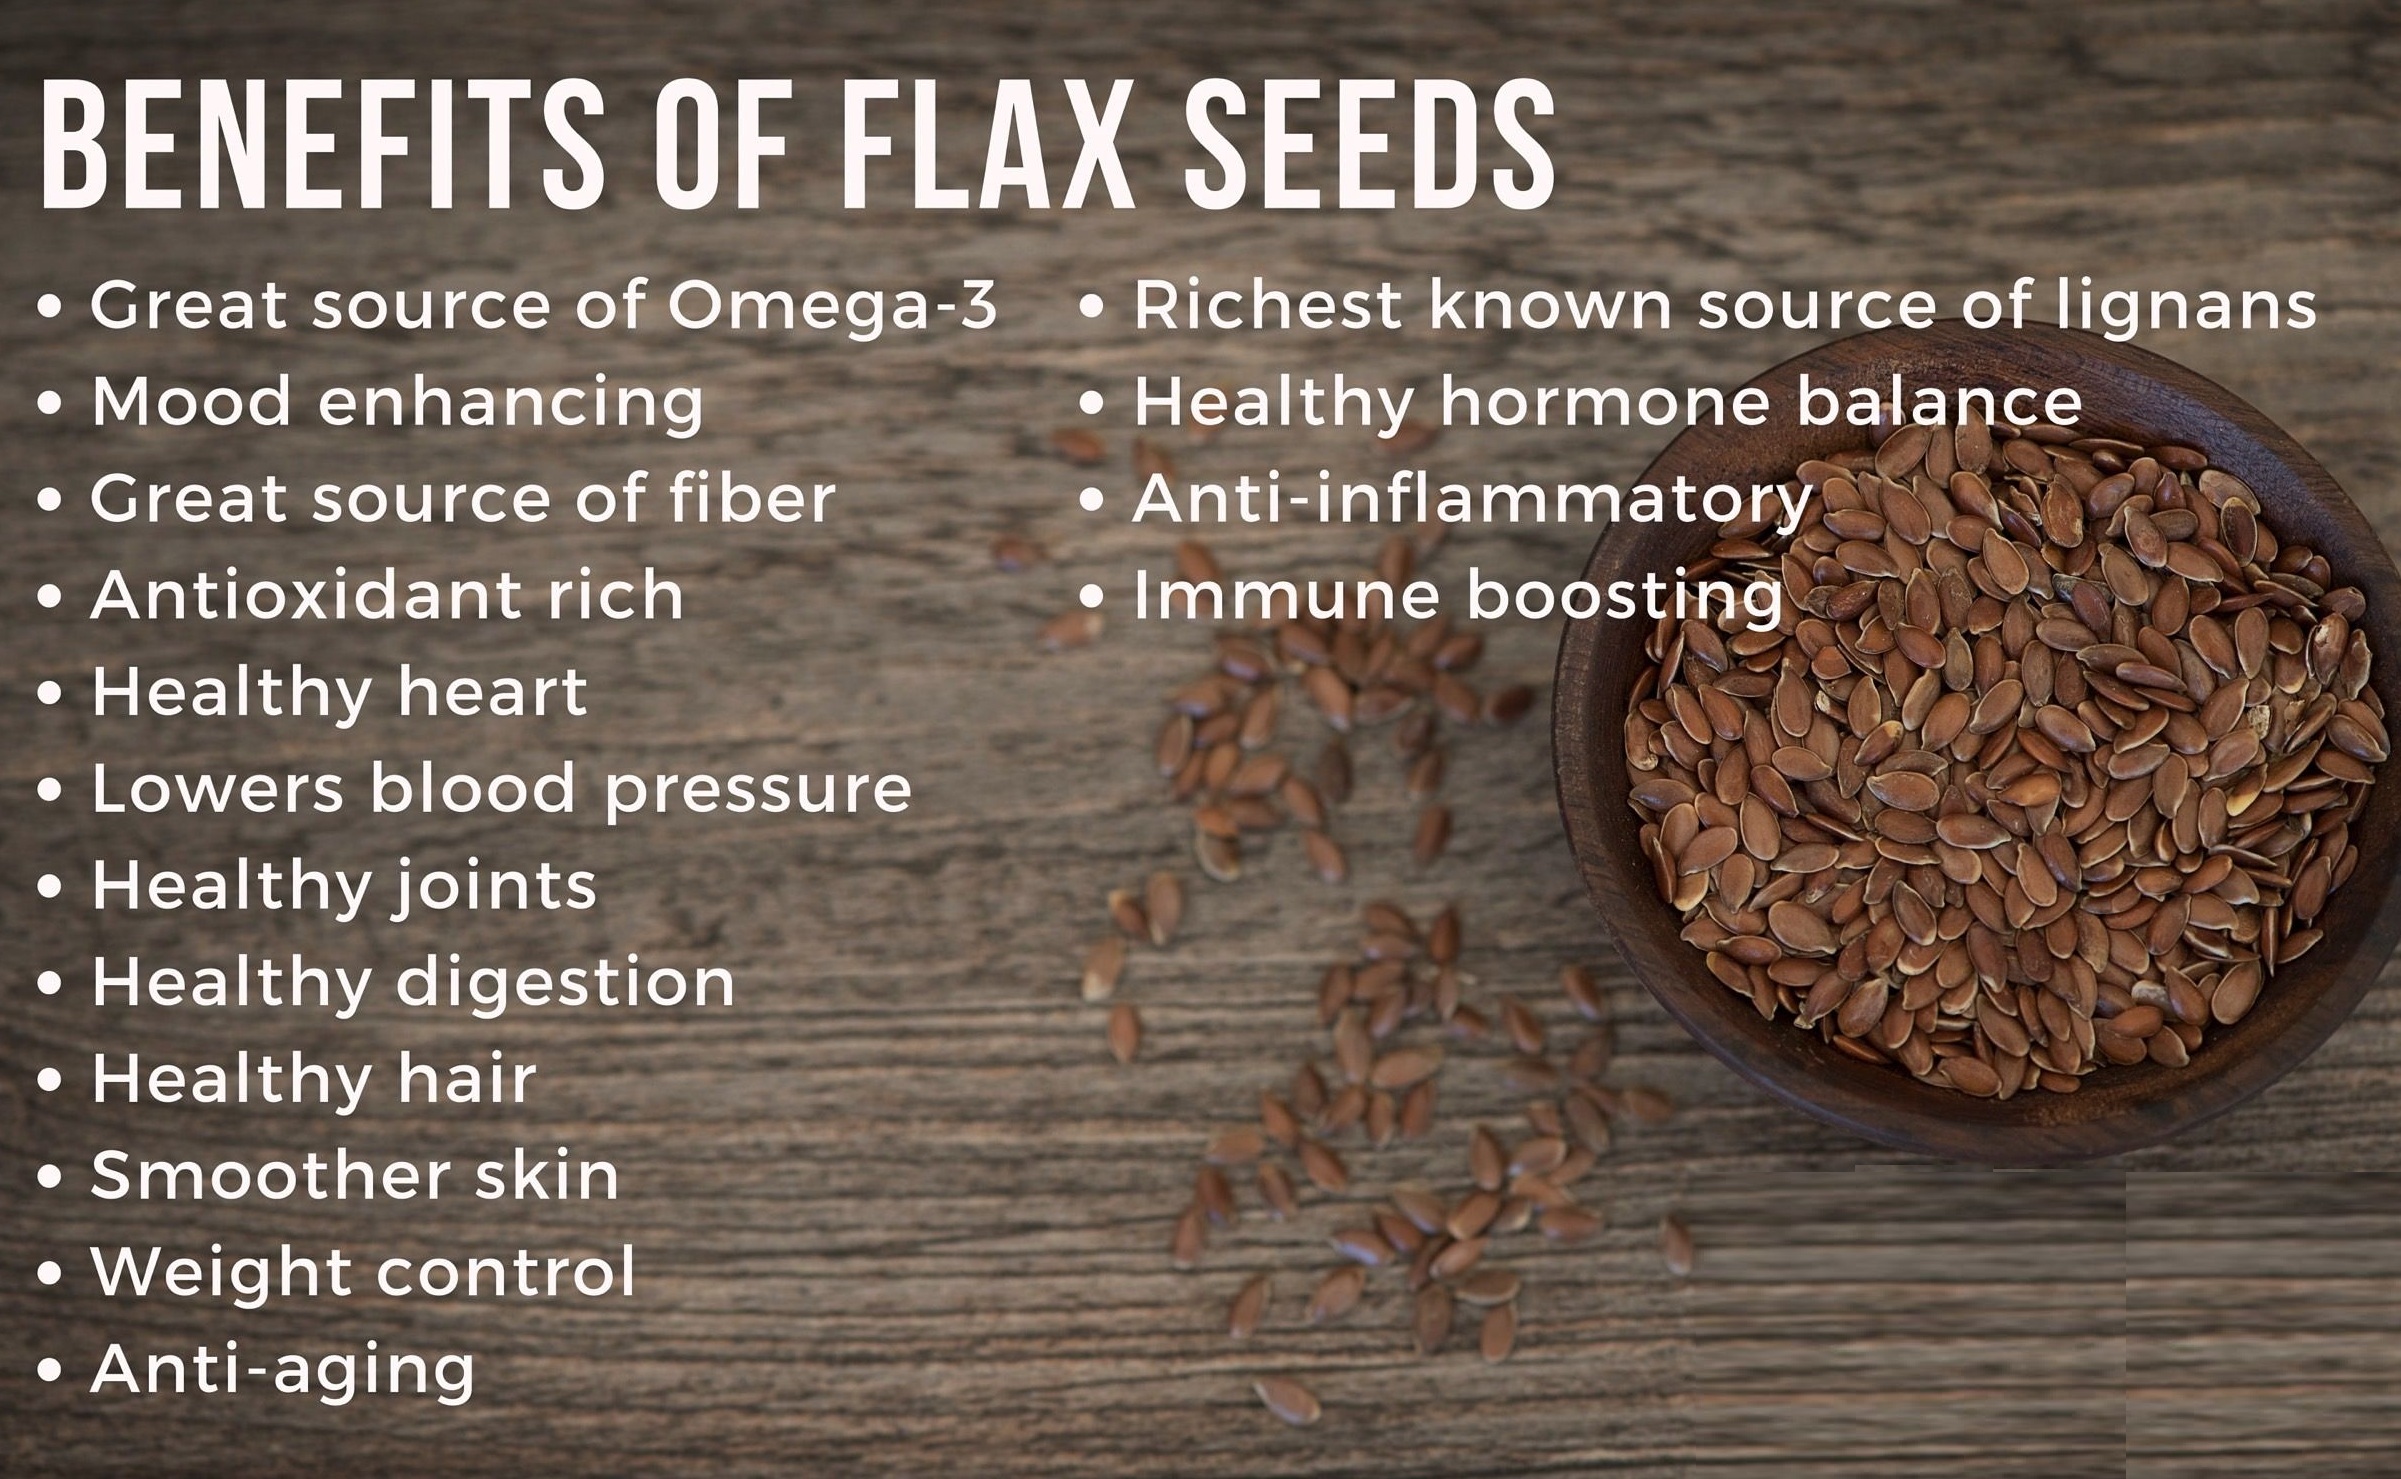 Most Important list of the top nutritional benefits of flax seeds